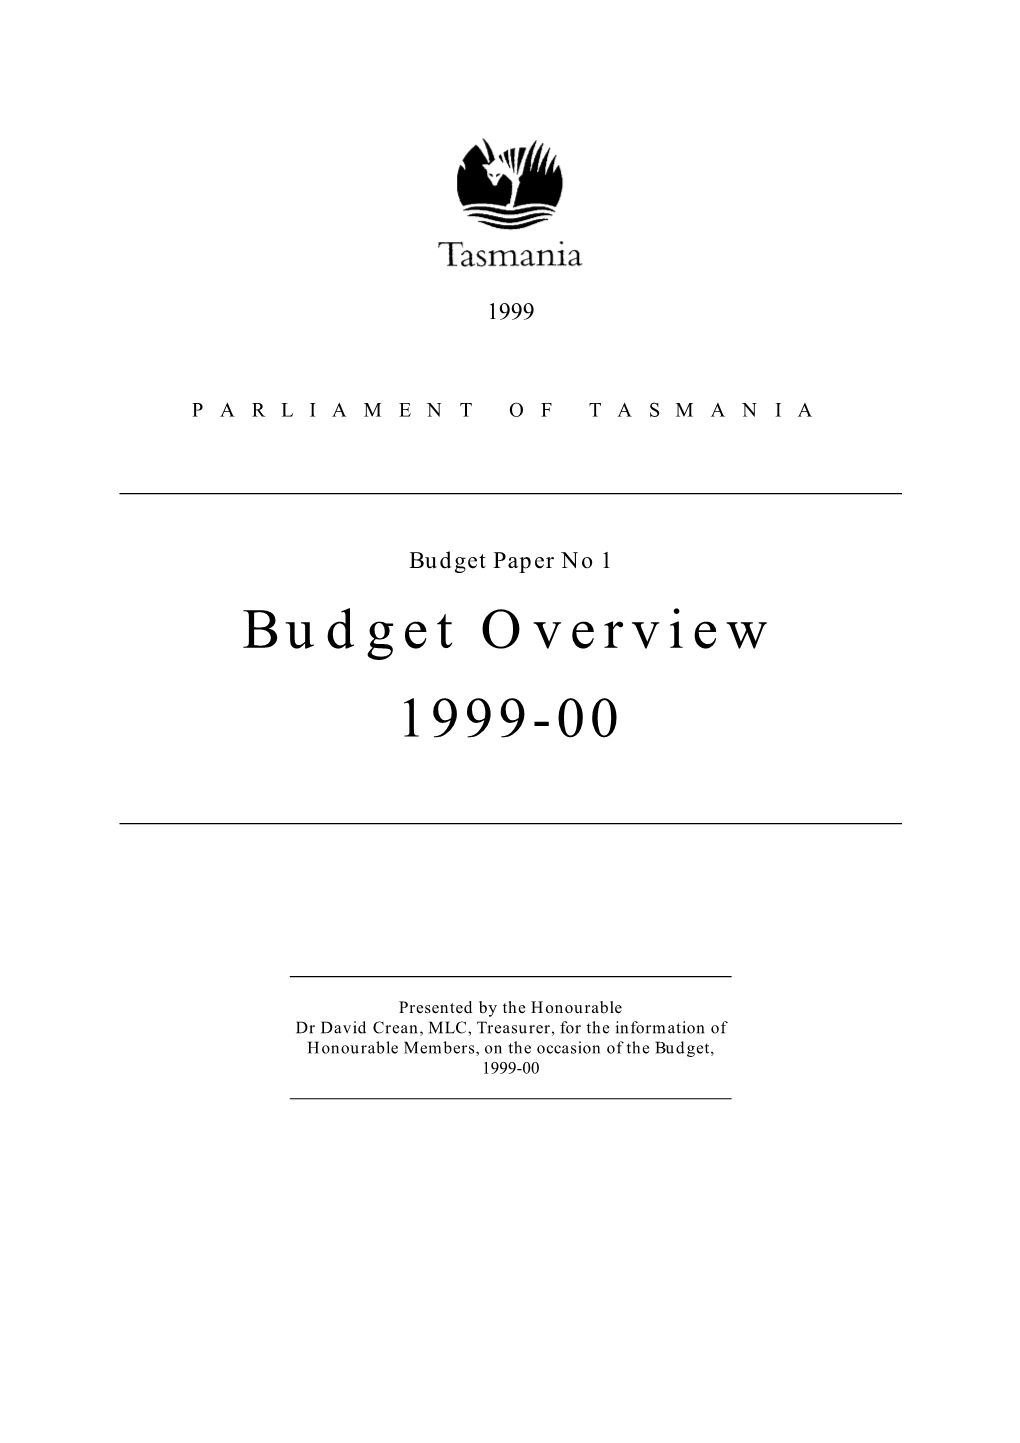 Budget Overview 1999-00